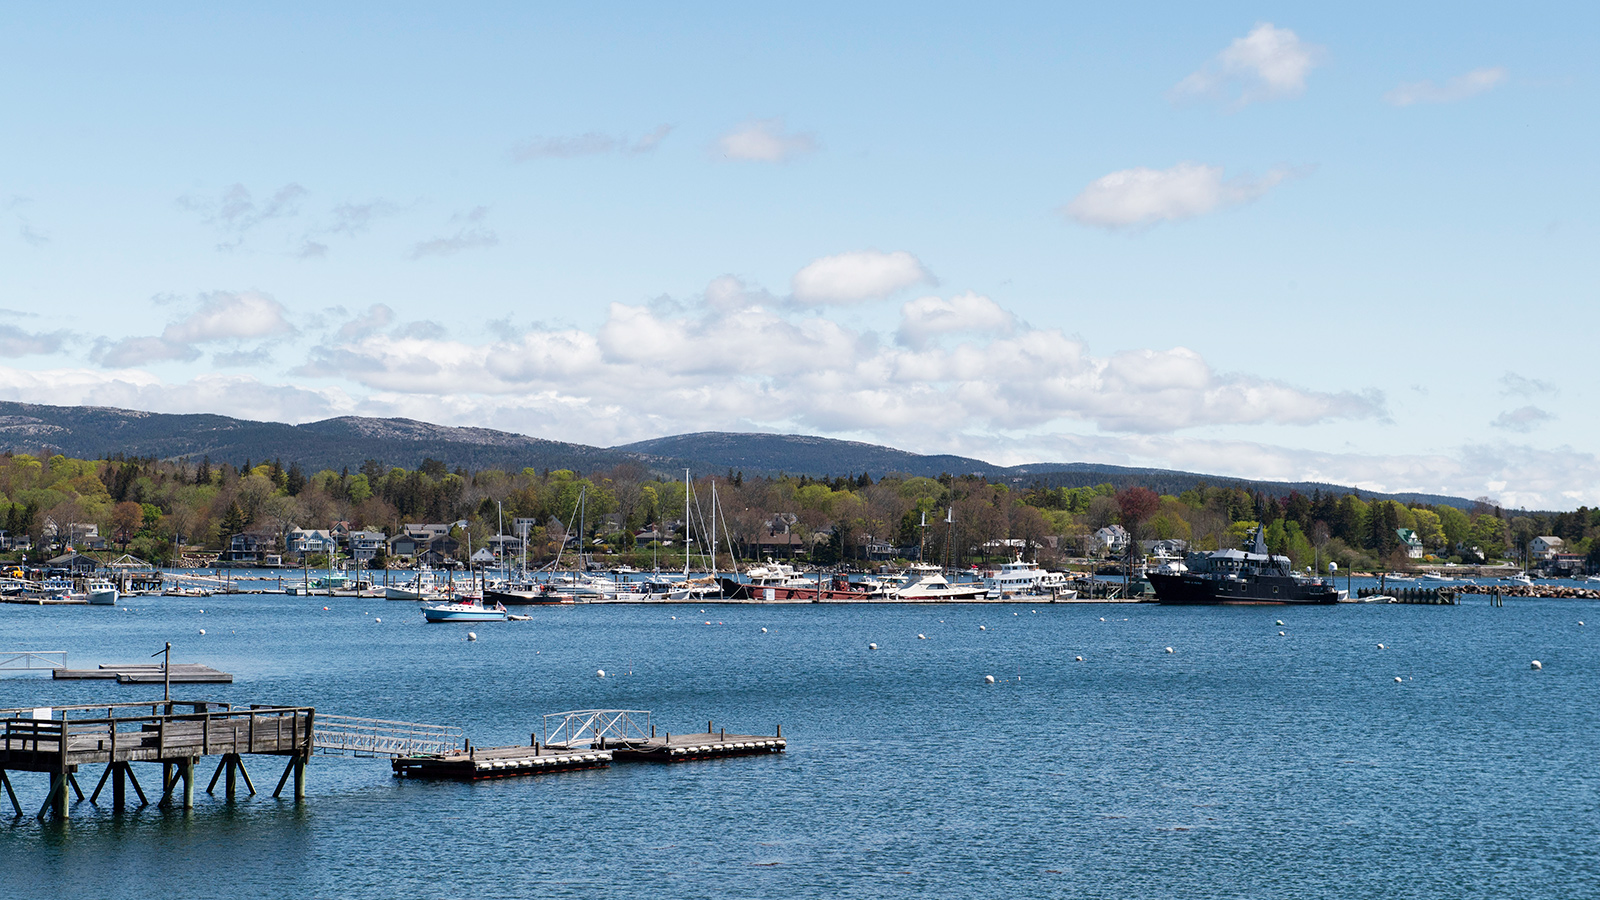 A wide landscape of Southwest Harbor. There is a wharf in the foreground, many boats in the harbor, and the mountains of Acadia National Park in the distance.